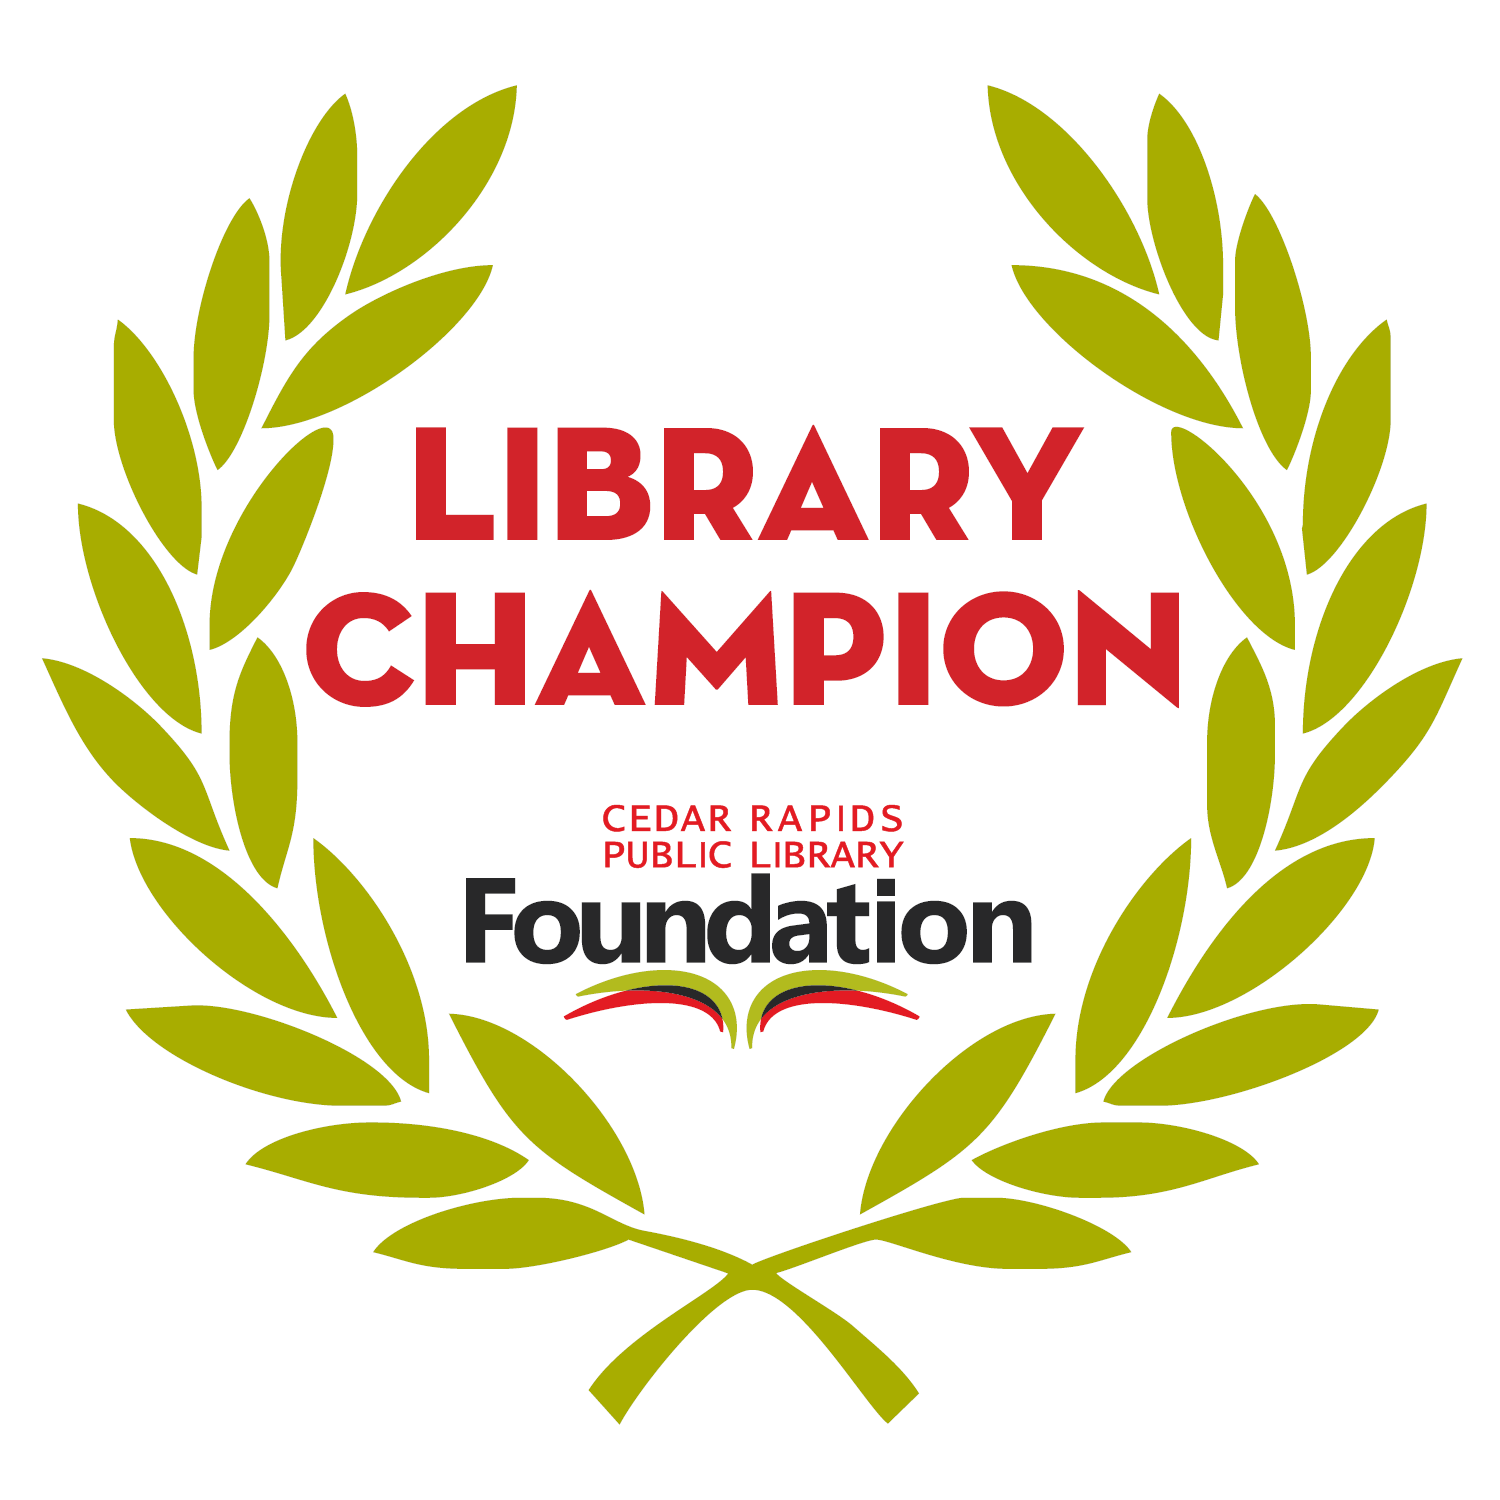 Library champion logo updated